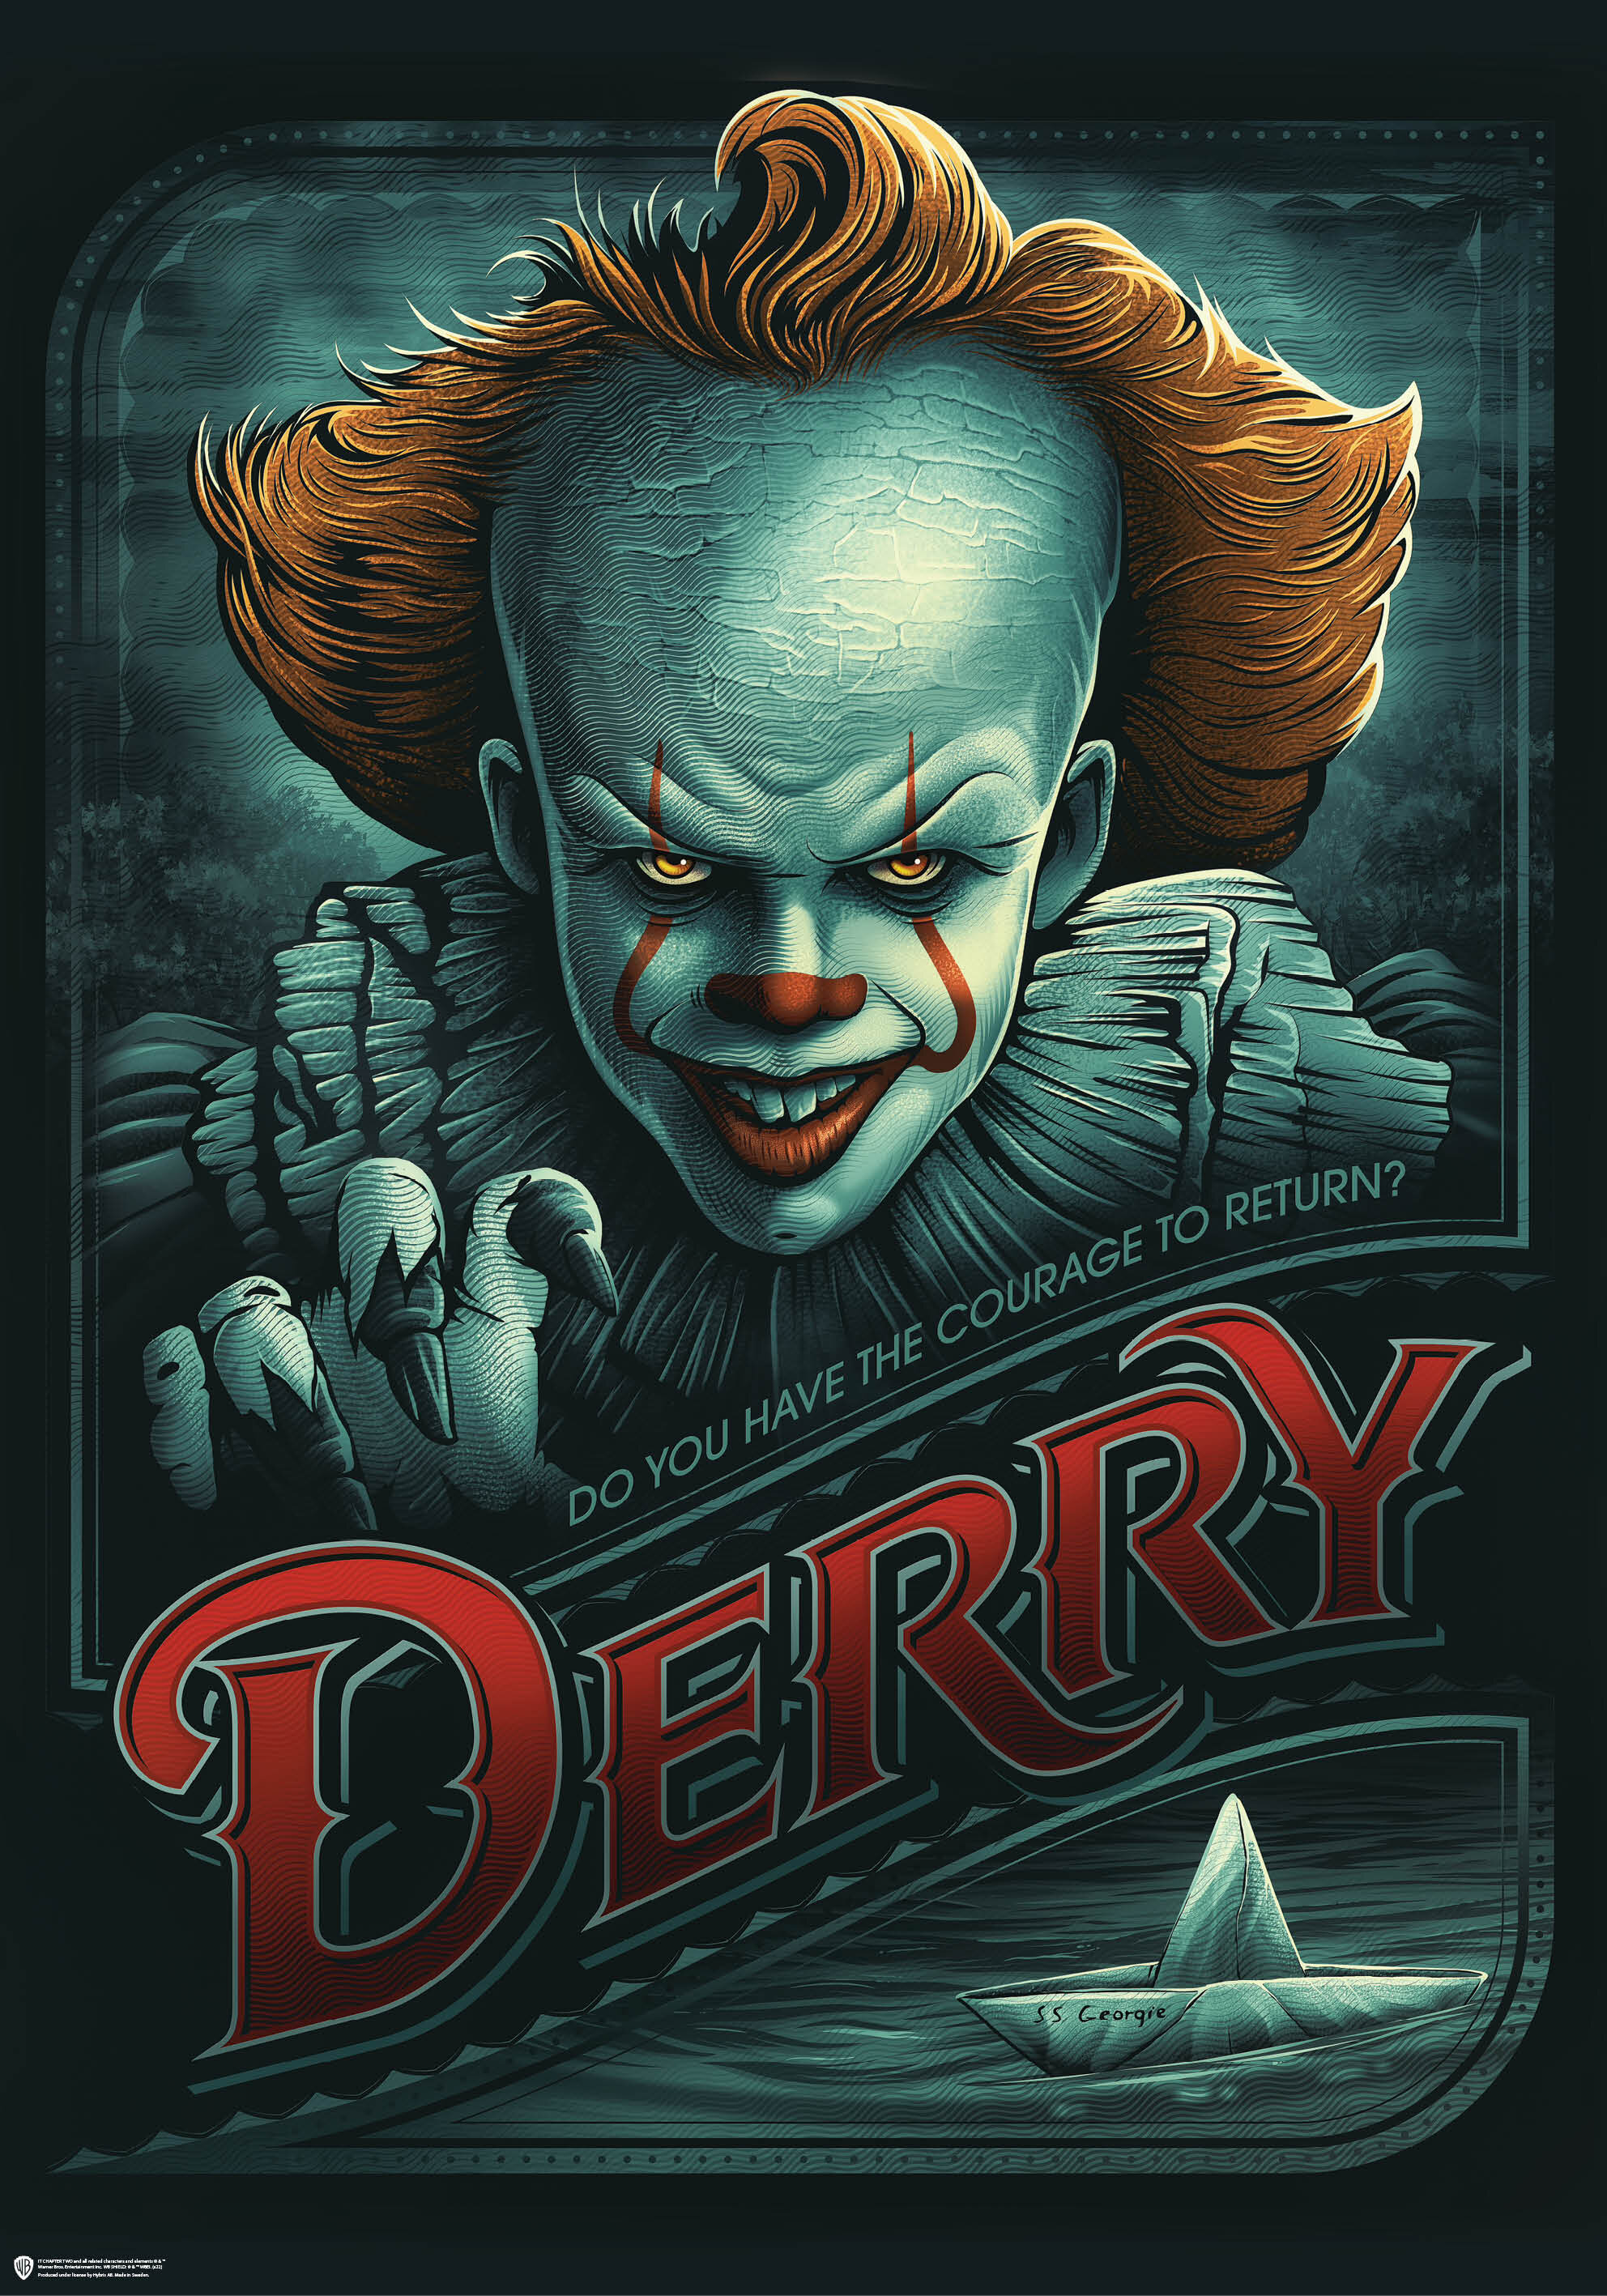 IT - Courage To Return To Derry Poster